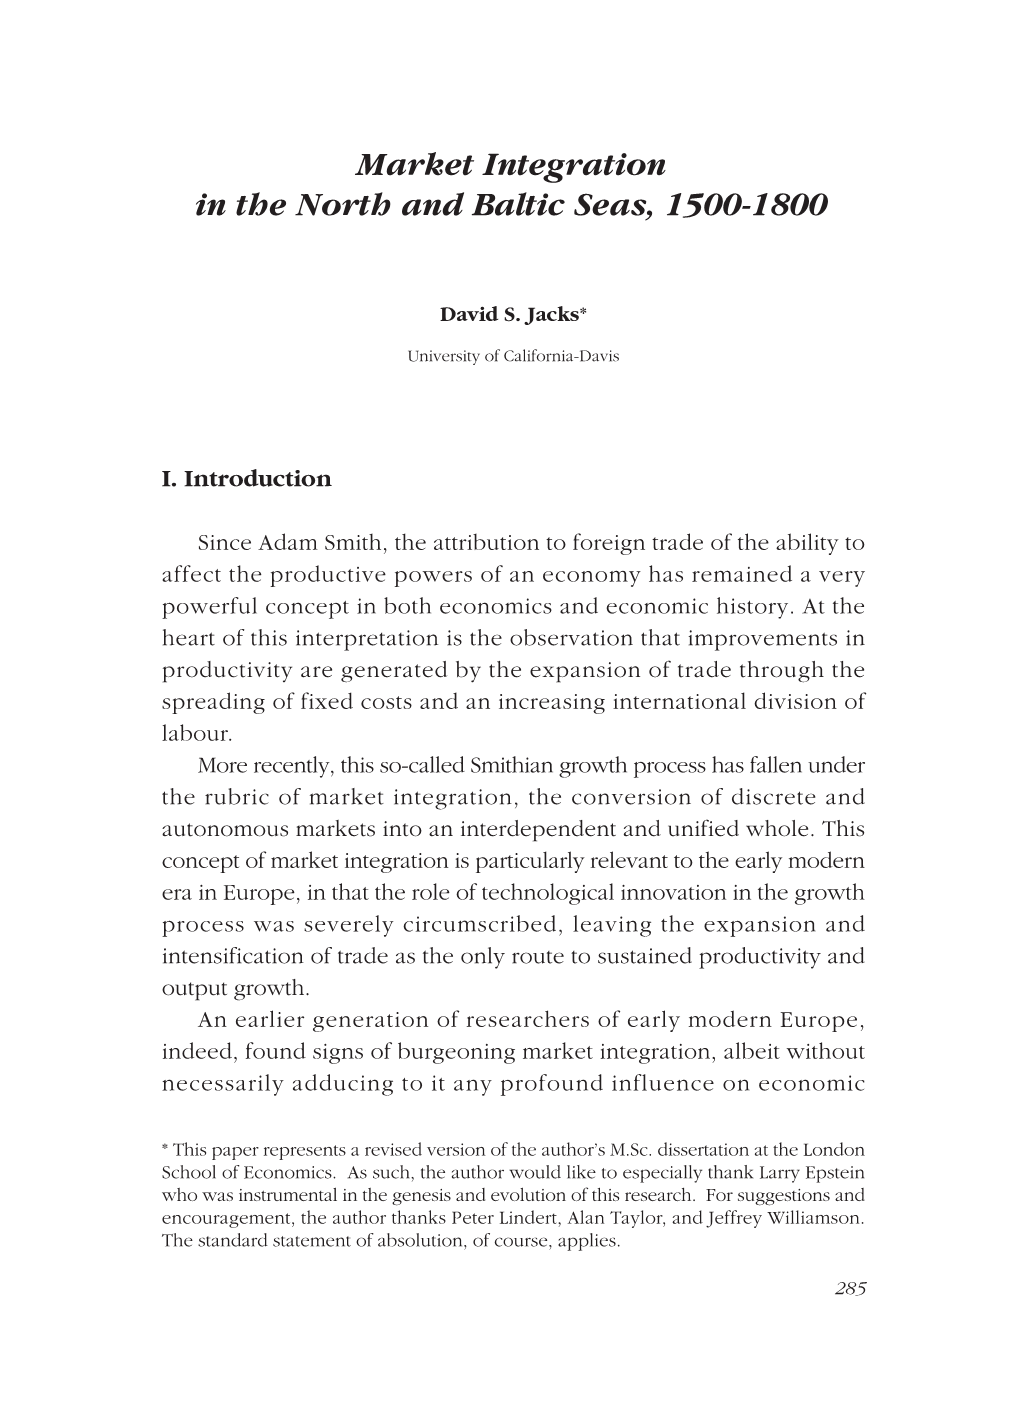 Market Integration in the North and Baltic Seas, 1500-1800. London School of Economics, Working Papers in Economic History, No